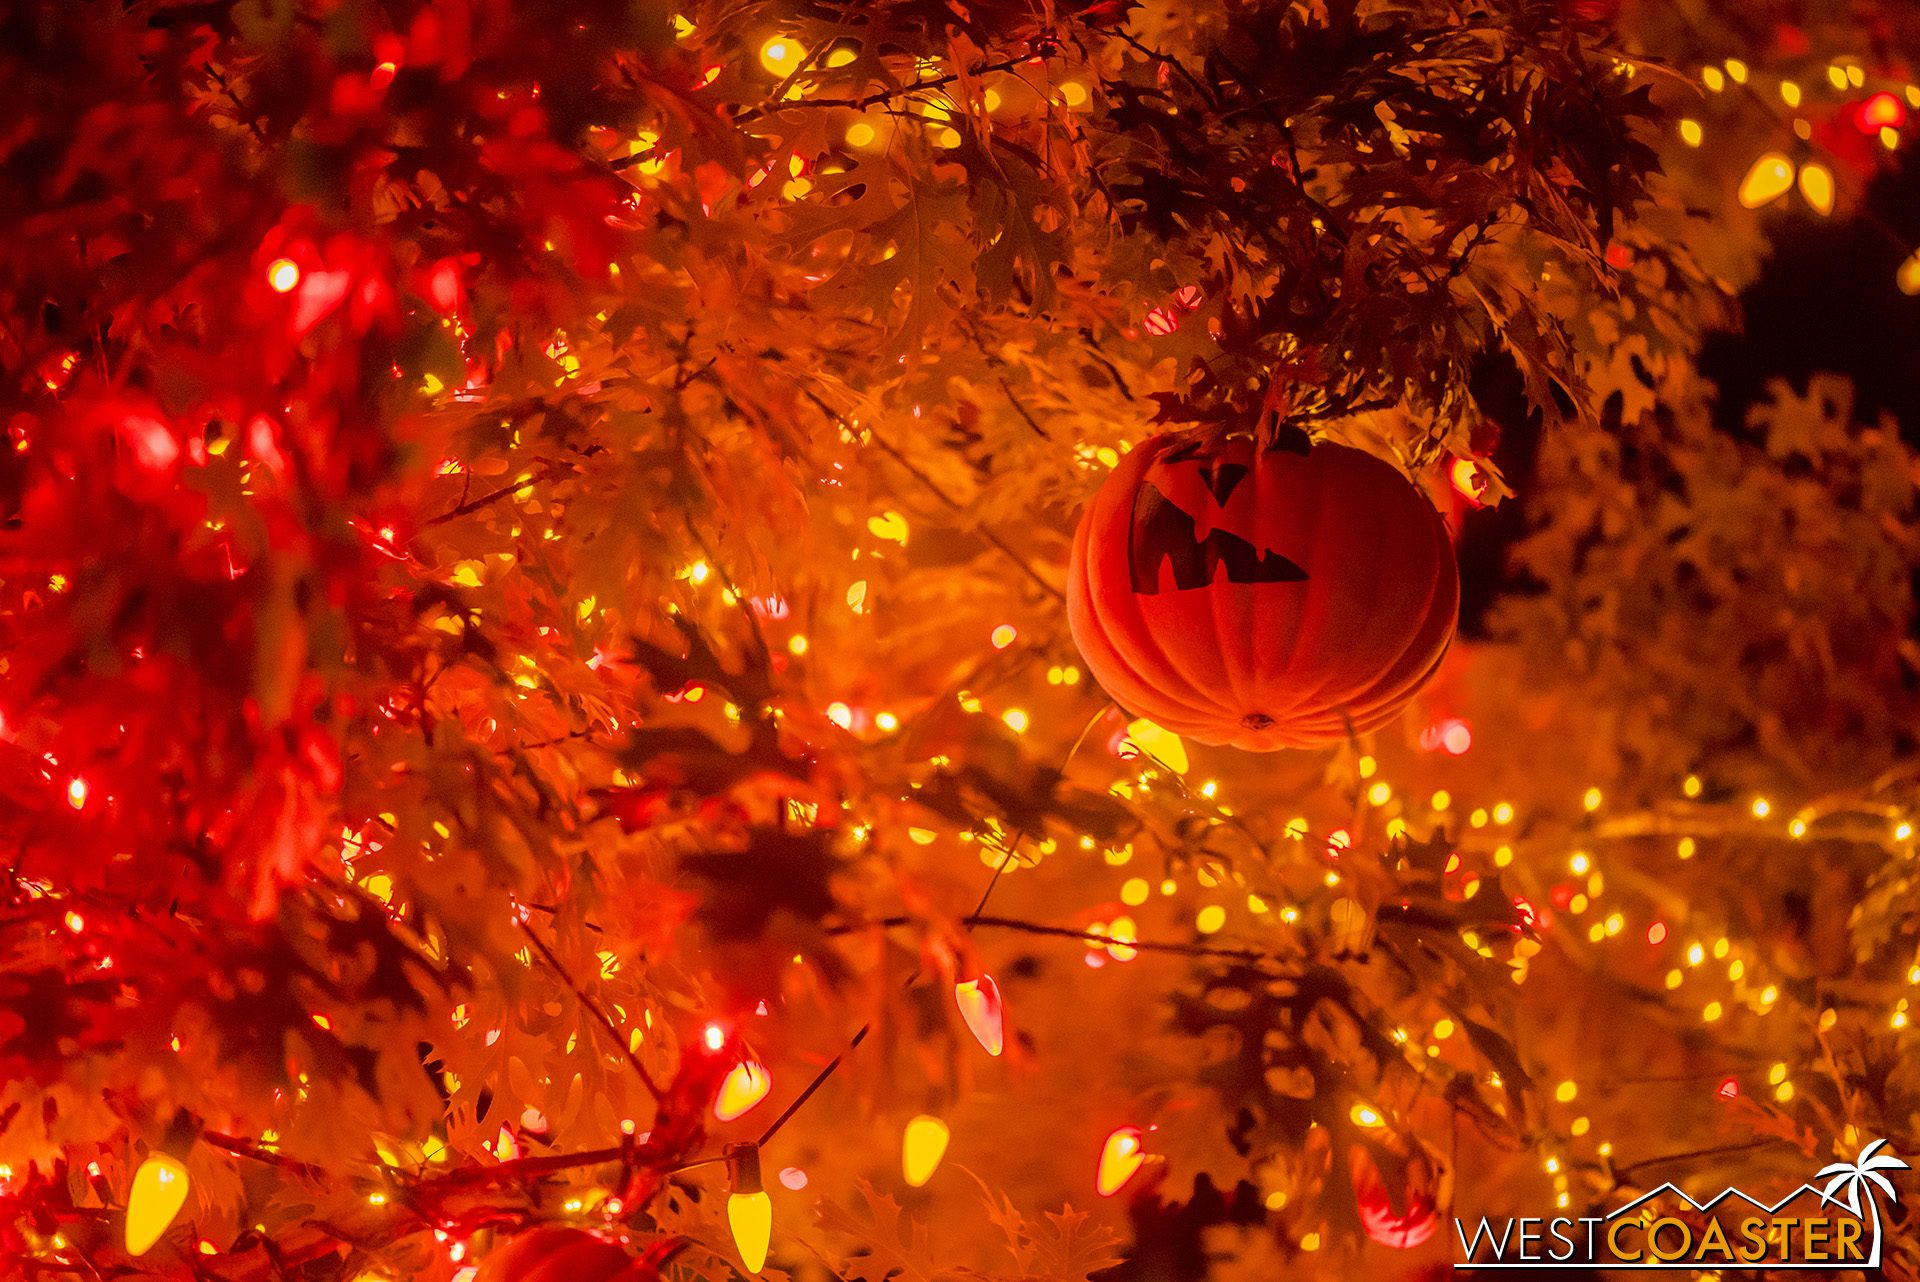  If there can be a Christmas tree, though, why not a Halloween tree? 